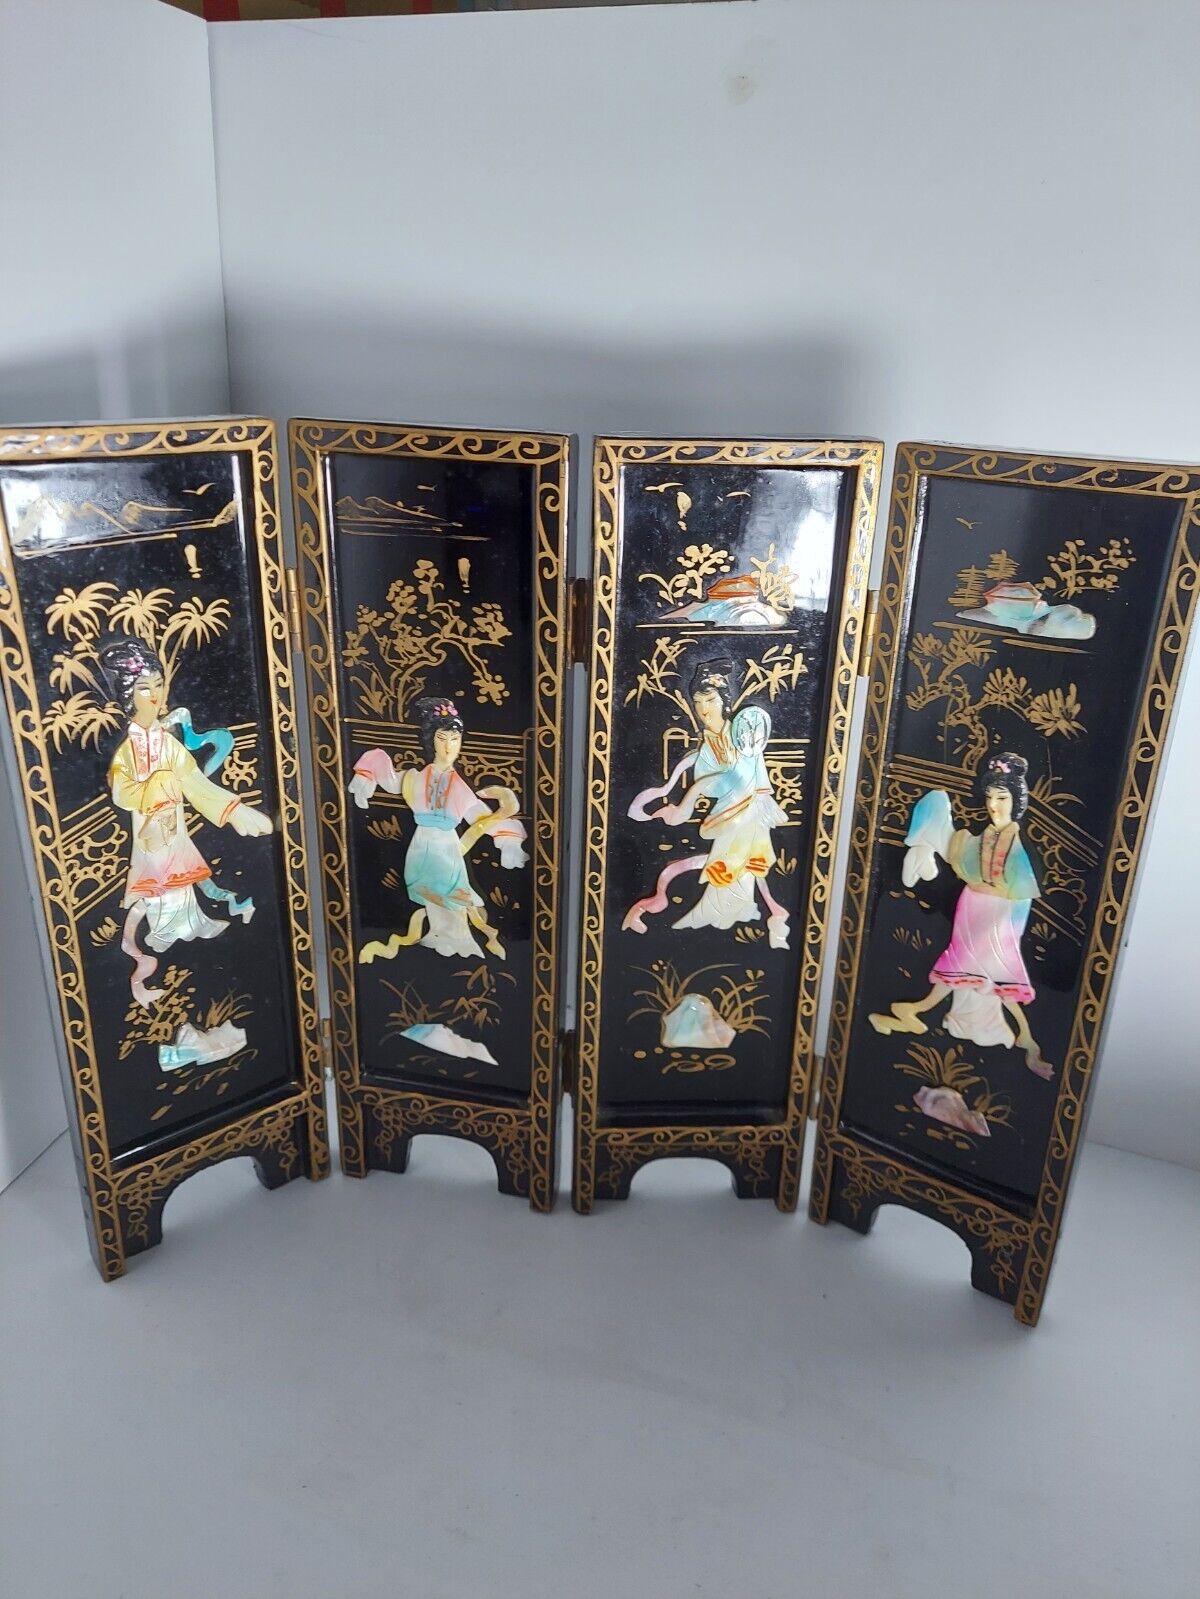 Vintage Japanese Chinese Geisha Black Lacquered Tabletop Panels 14”